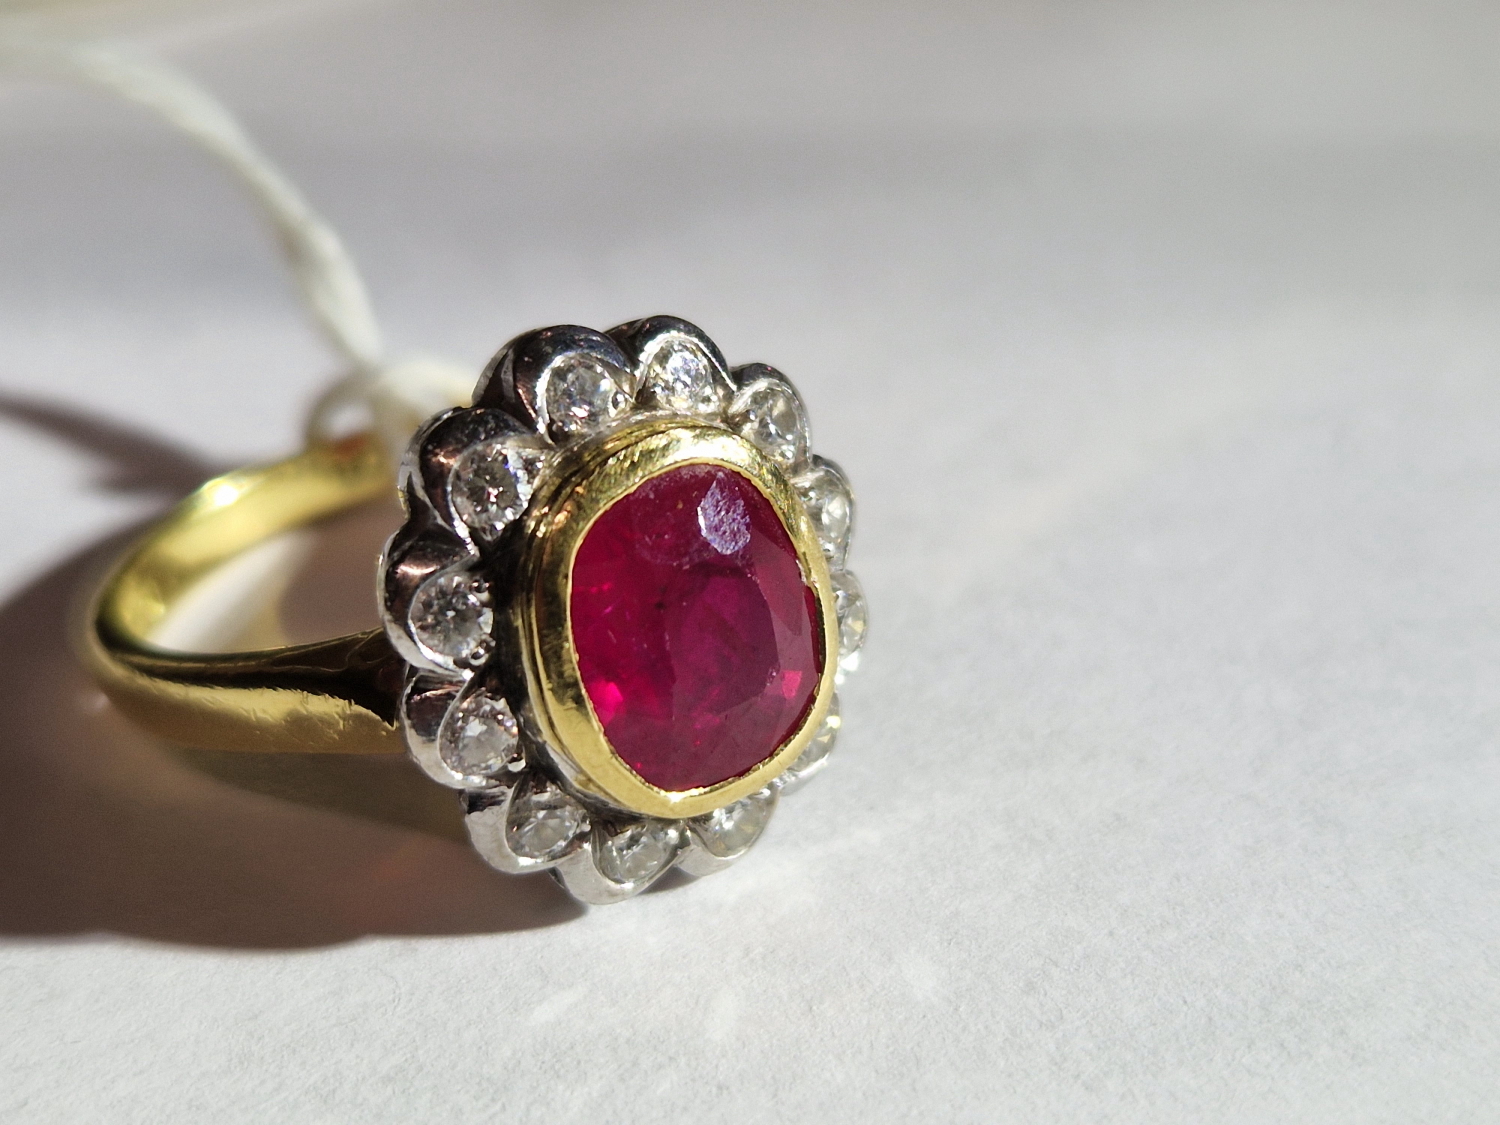 AN 18ct HALLMARKED GOLD RUBY AND DIAMOND OVAL SHAPED CLUSTER RING. THE SINGLE MEDIUM TO DARK - Image 20 of 20